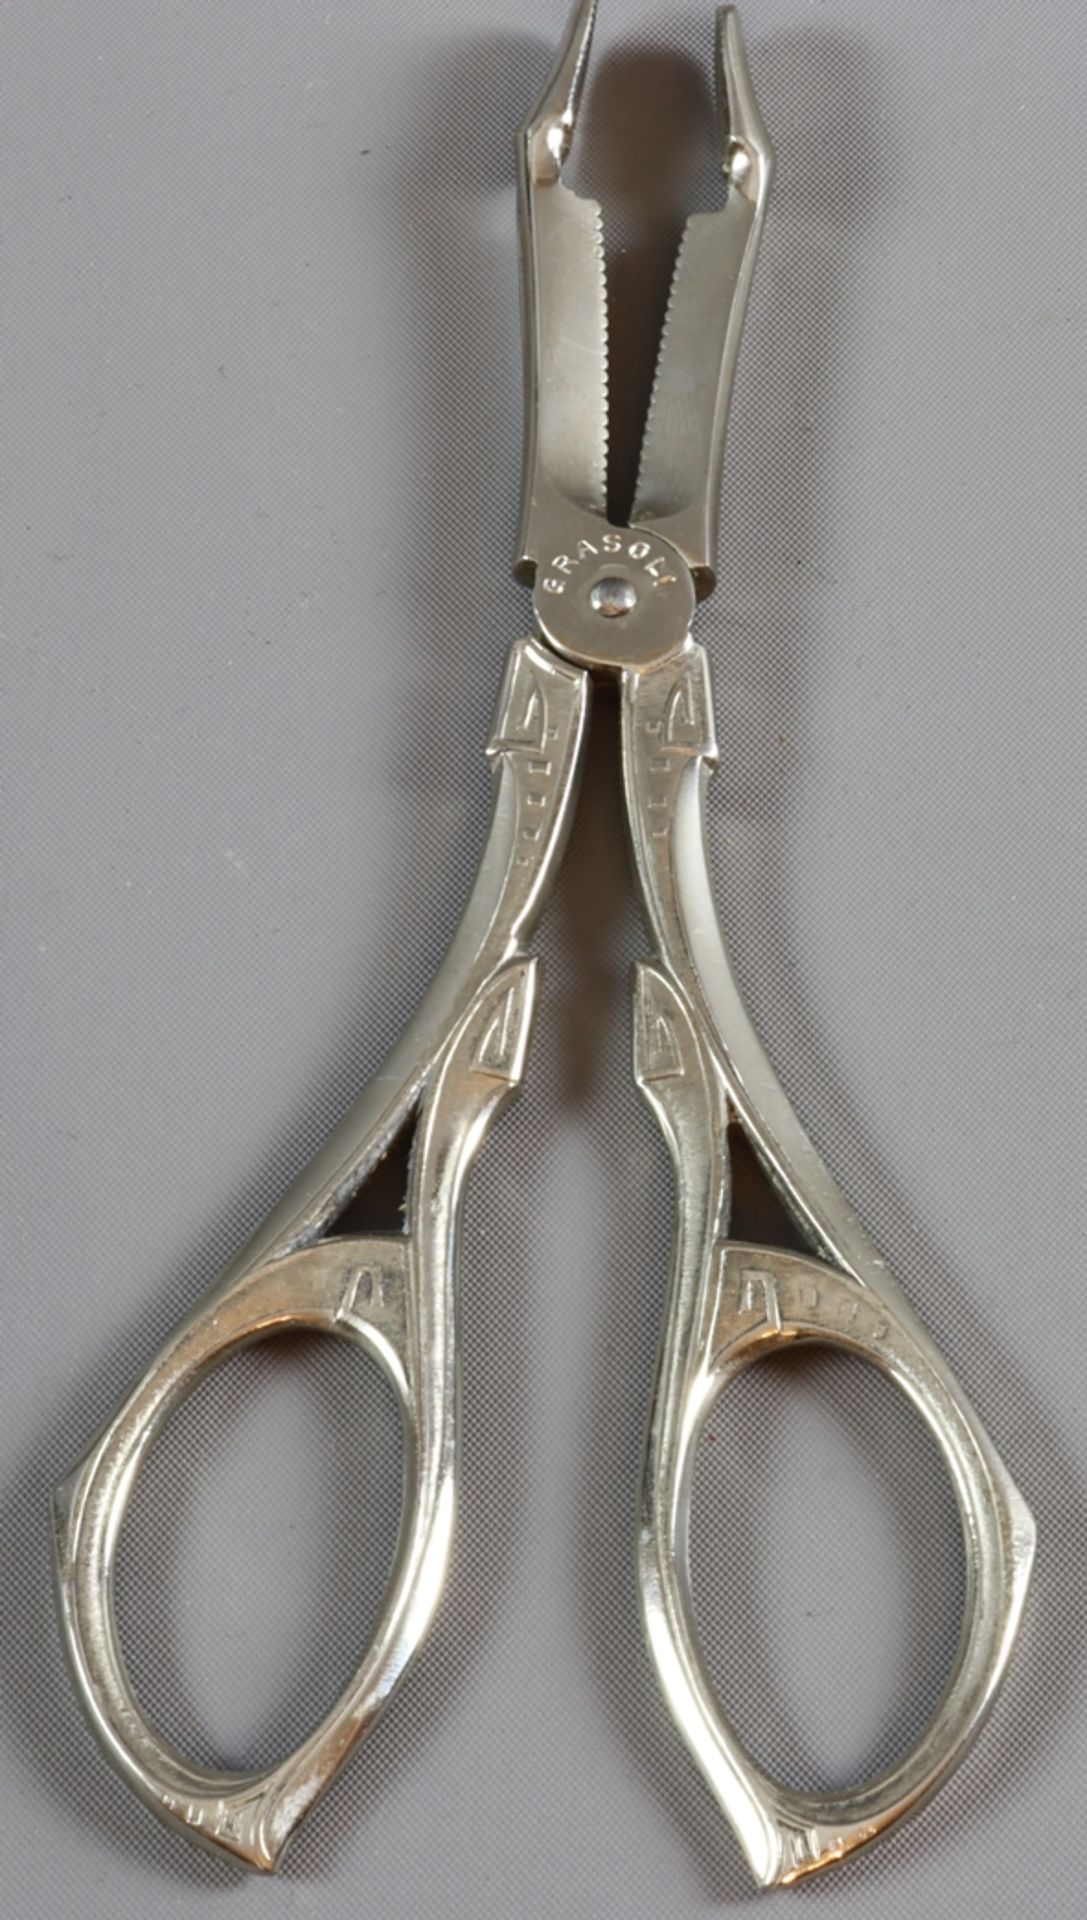 Silver pastry tongs and others, Historism 1900 - 1920, German - Image 3 of 3